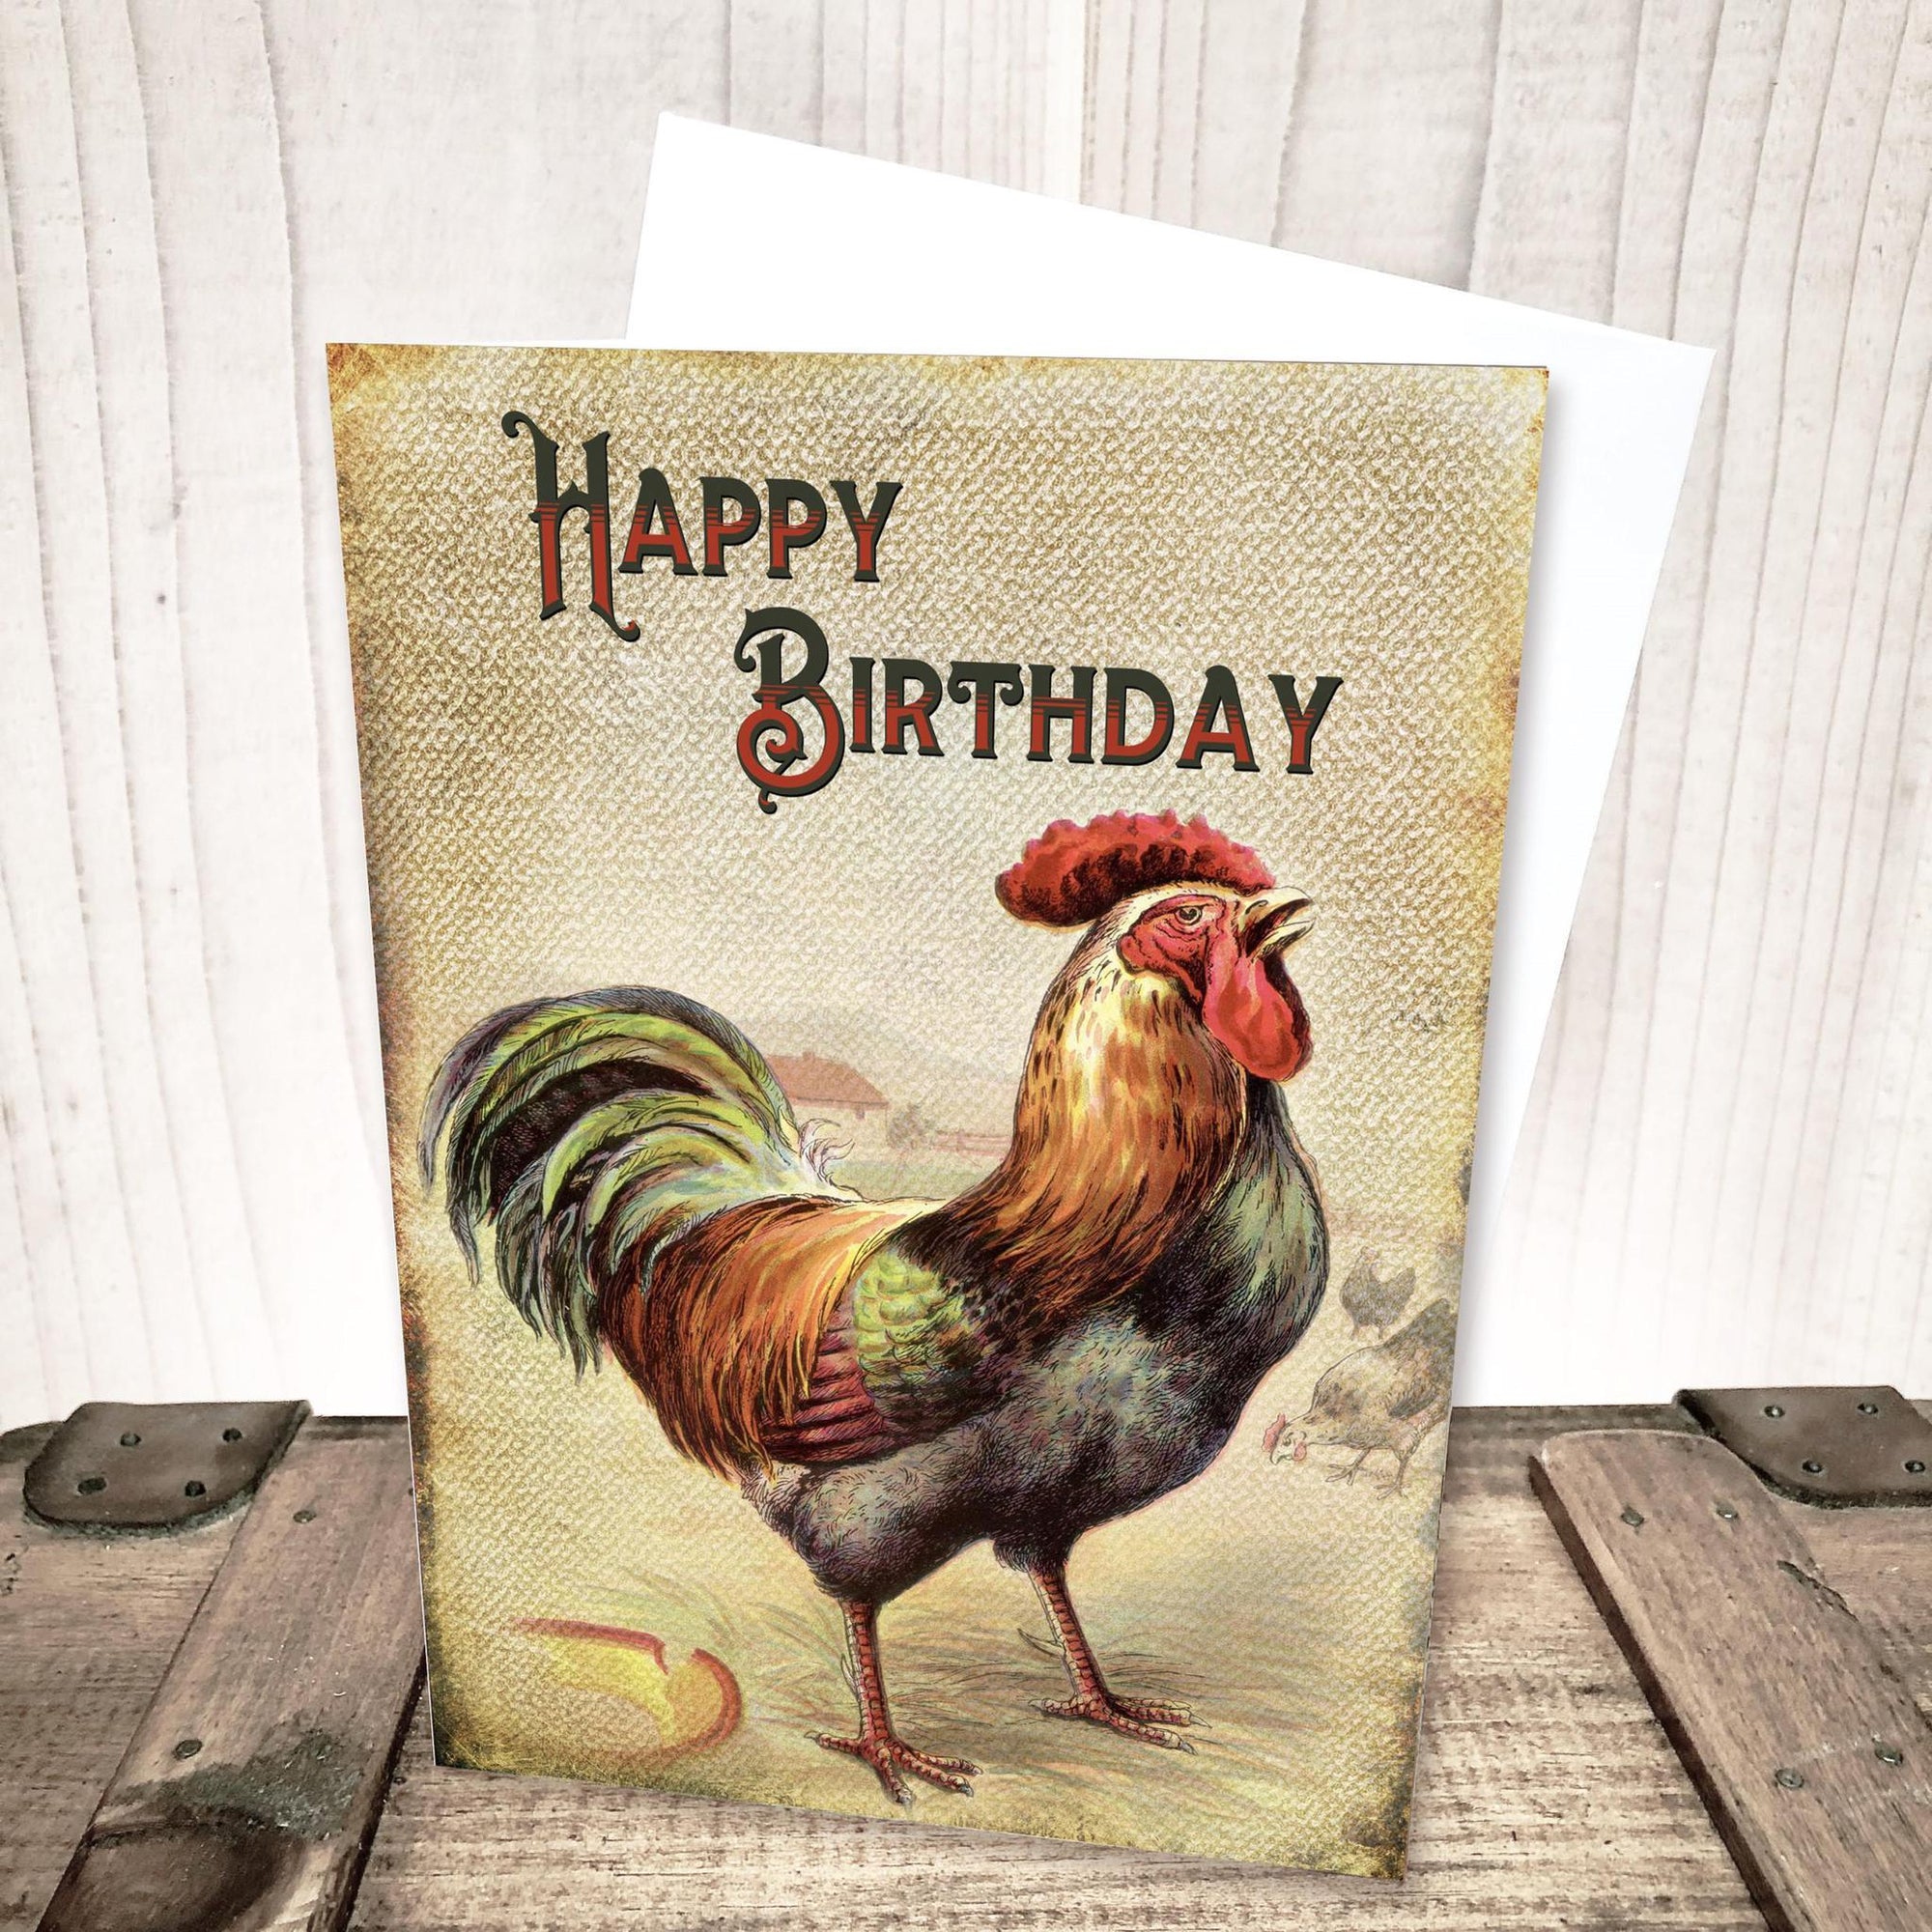 Vintage Rooster Vintage Birthday Card by Yesterday's Best